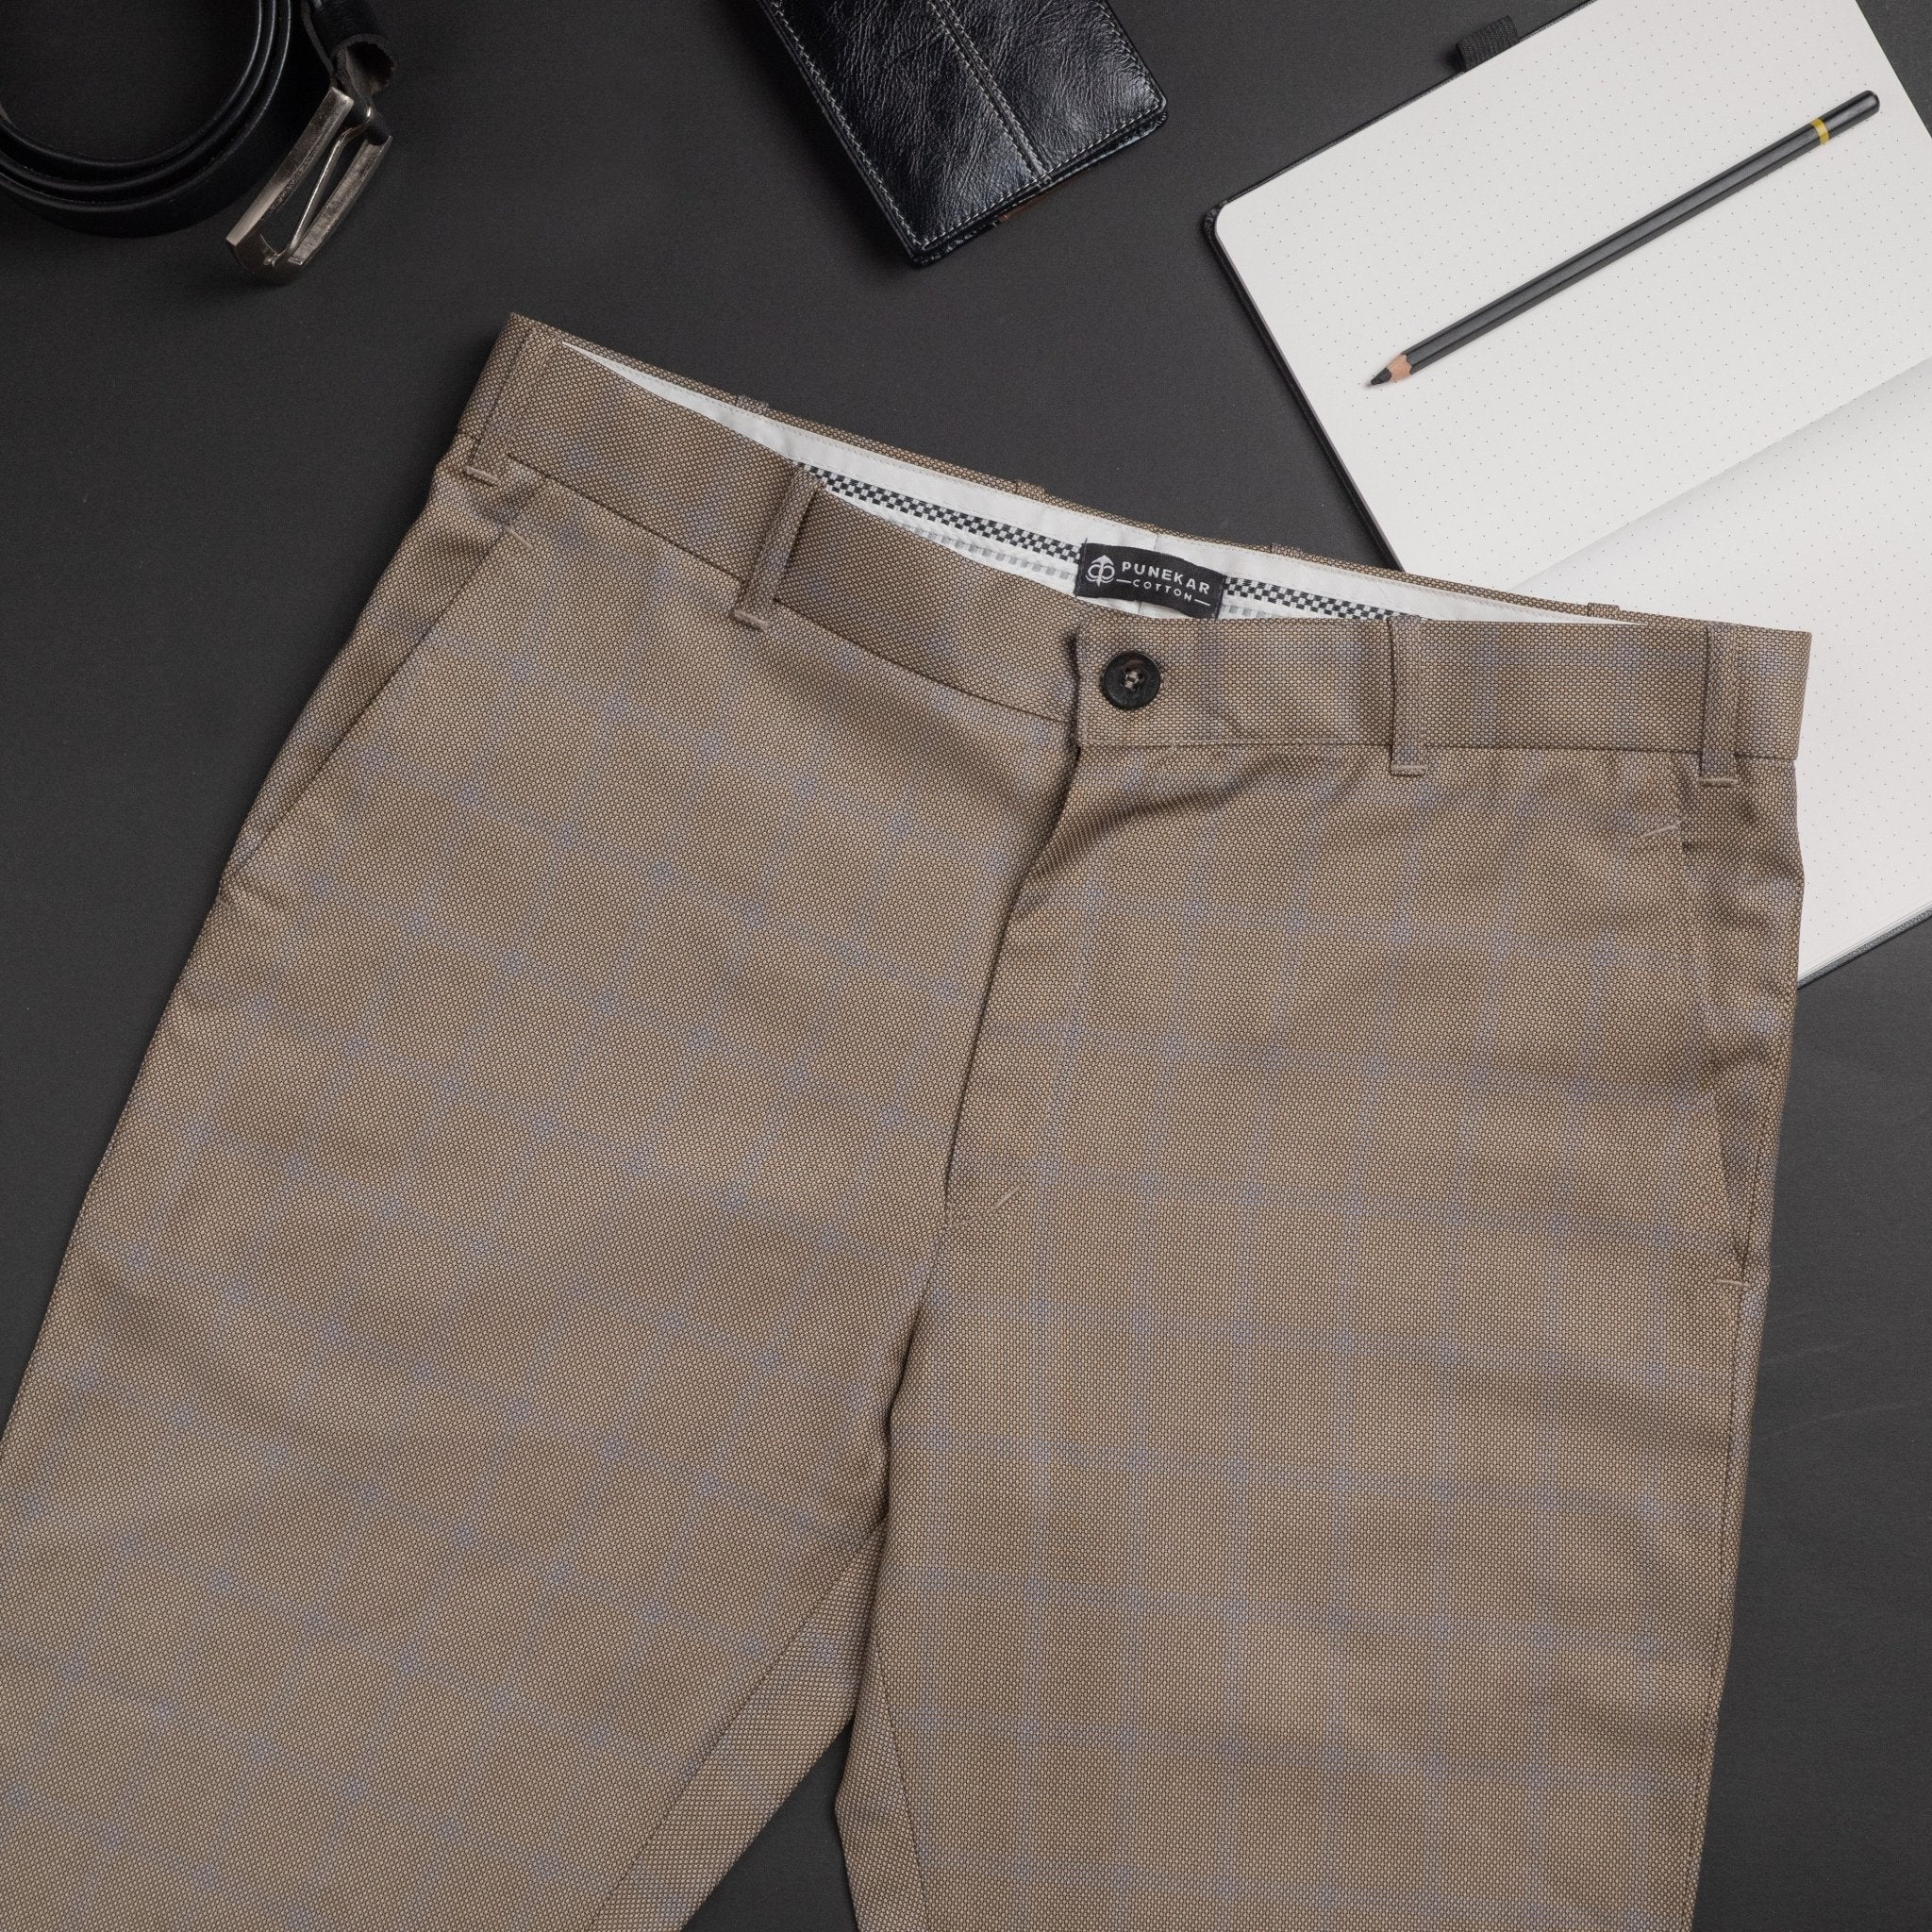 Essential Pants Regular Silver Blue | SHAPING NEW TOMORROW